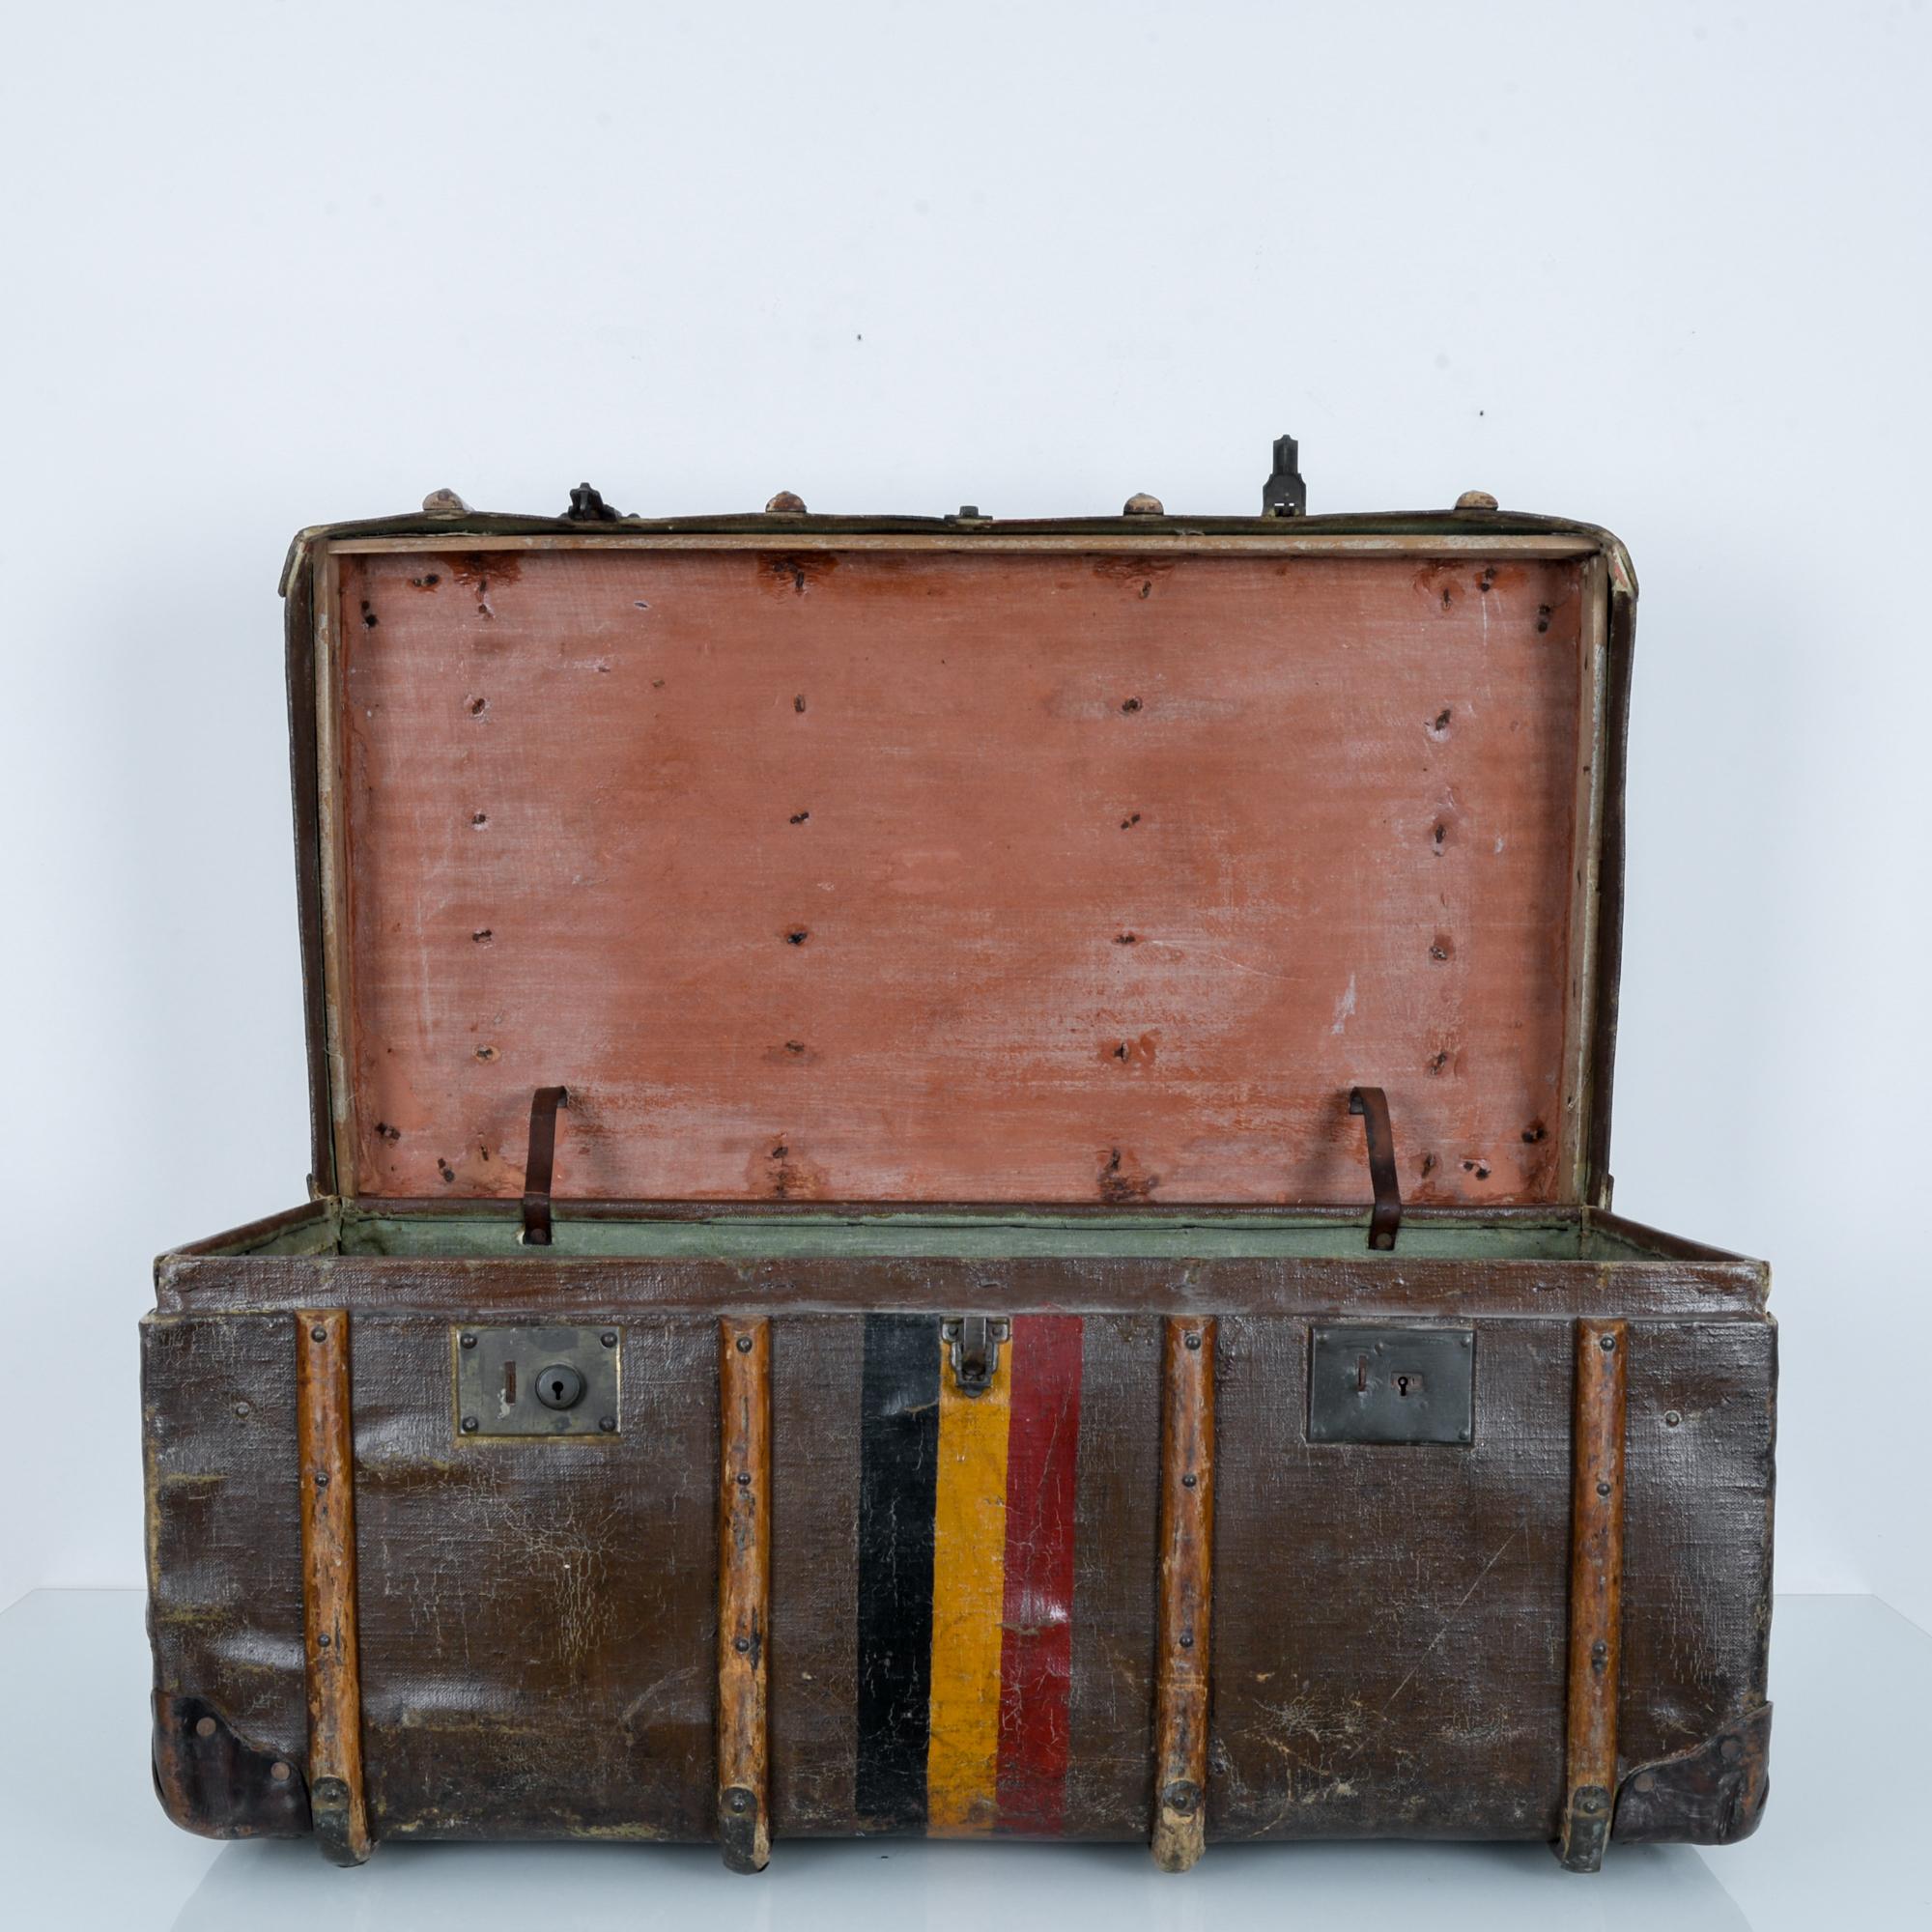 This leather suitcase was made in Belgian, circa 1900. The top lid can be fastened to the three front clasps. Curved wooden rods, reinforced by metal protect the trunk from damage. The colors of the Belgian flag are painted in the center of this